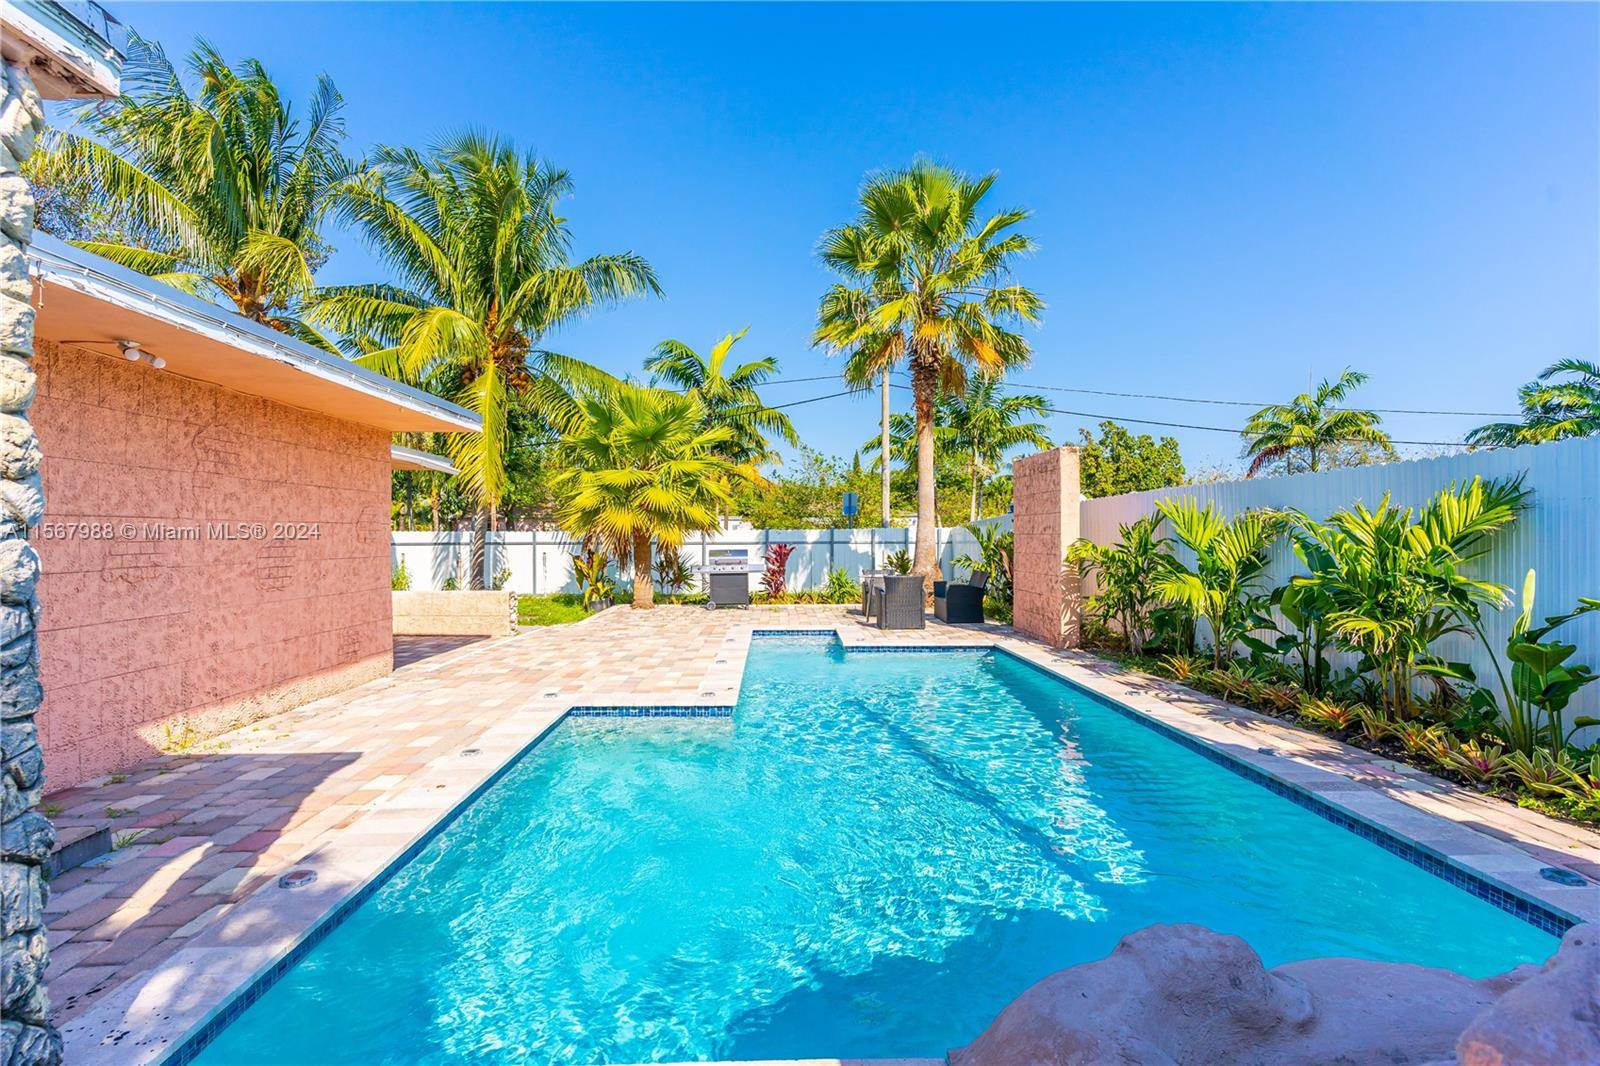 Centrally located completely remodeled corner single family home with a pool in the heart of North Miami.